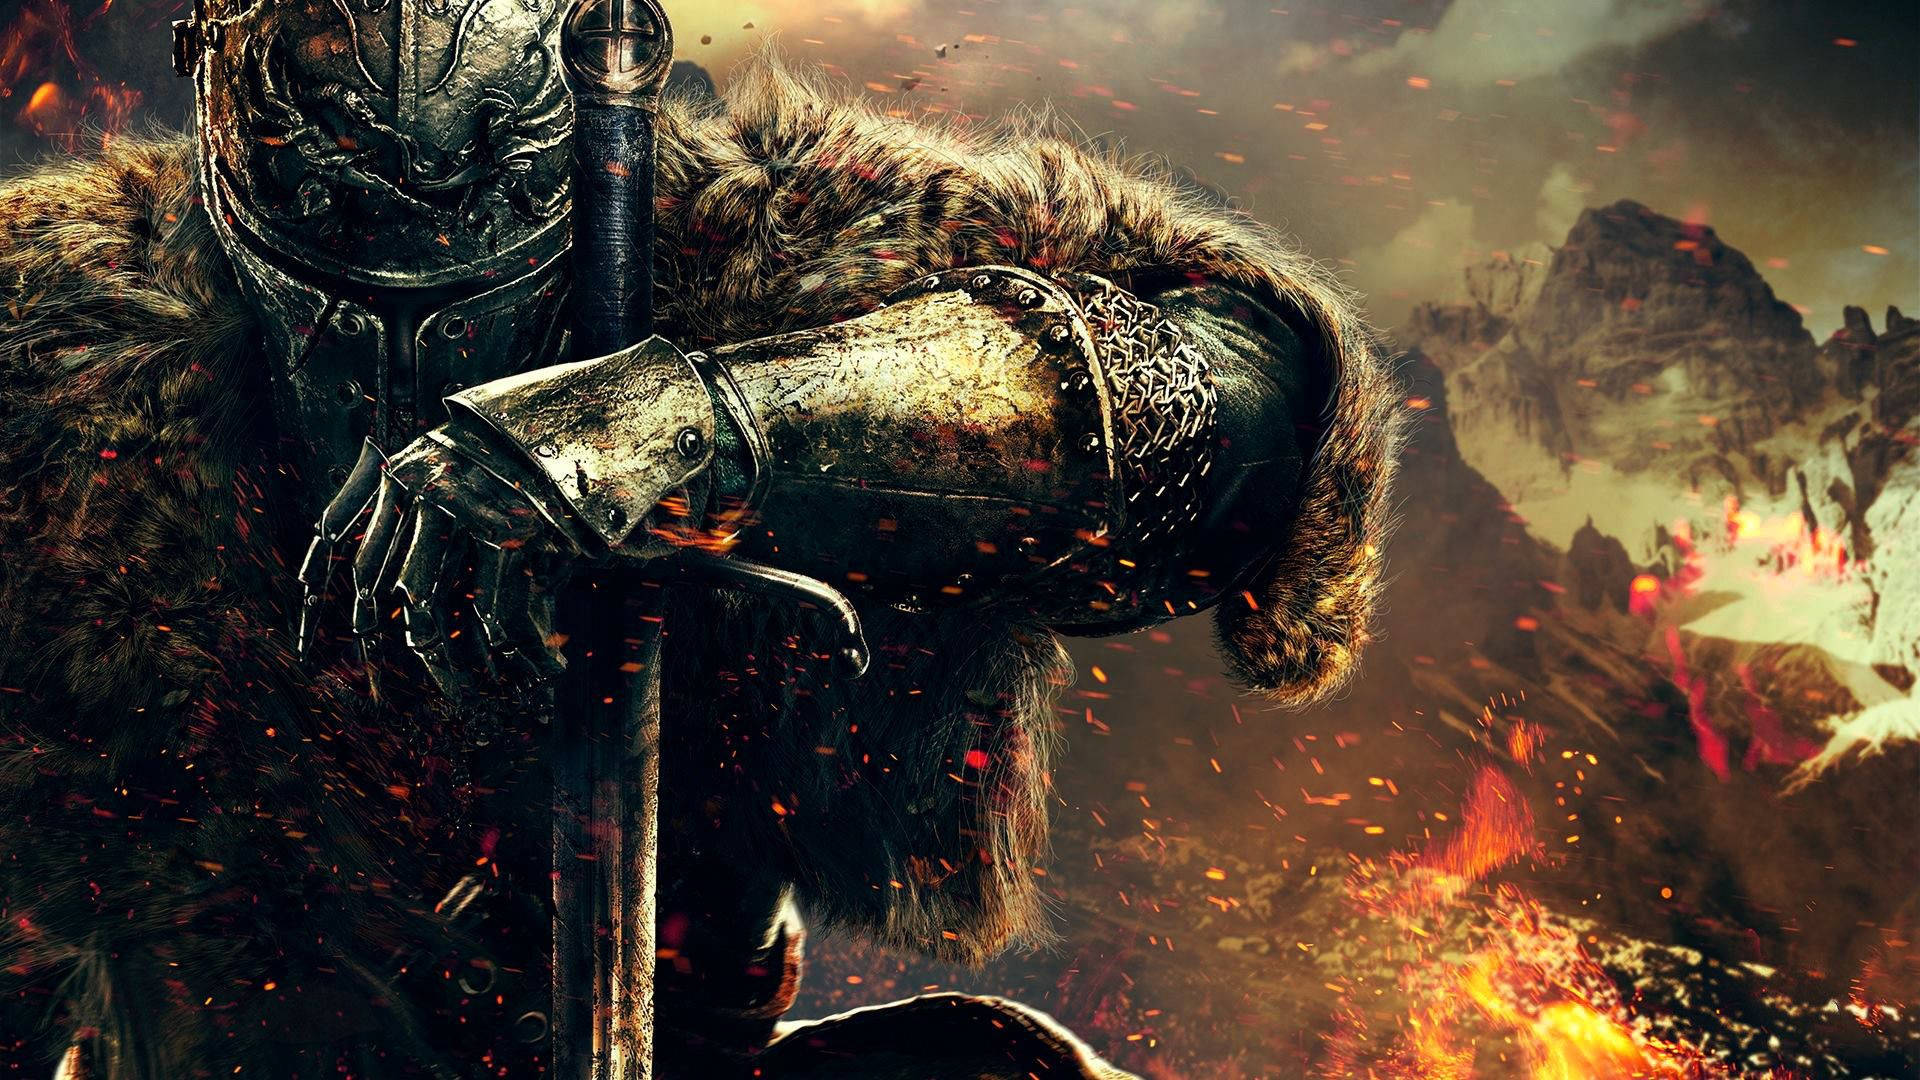 A daunting Medieval knight stands ready to protect his country from its enemies Wallpaper